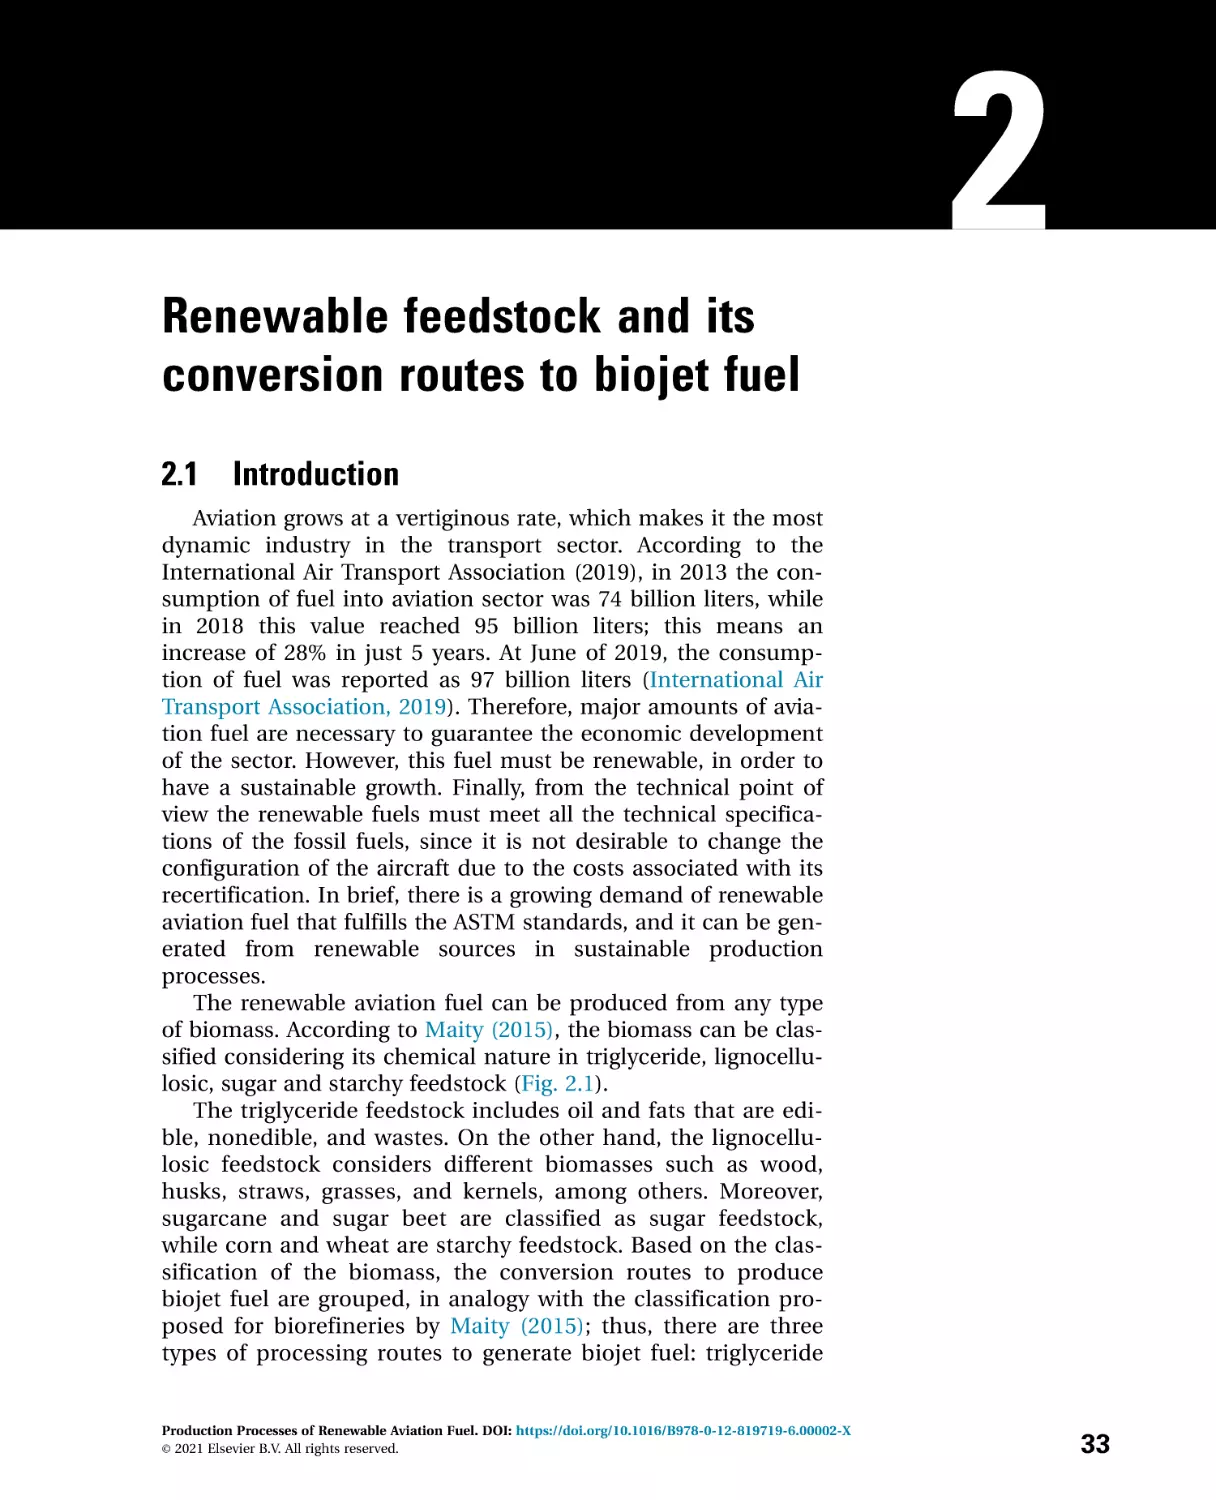 2---Renewable-feedstock-and-its-conversio_2021_Production-Processes-of-Renew
2 Renewable feedstock and its conversion routes to biojet fuel
2.1 Introduction